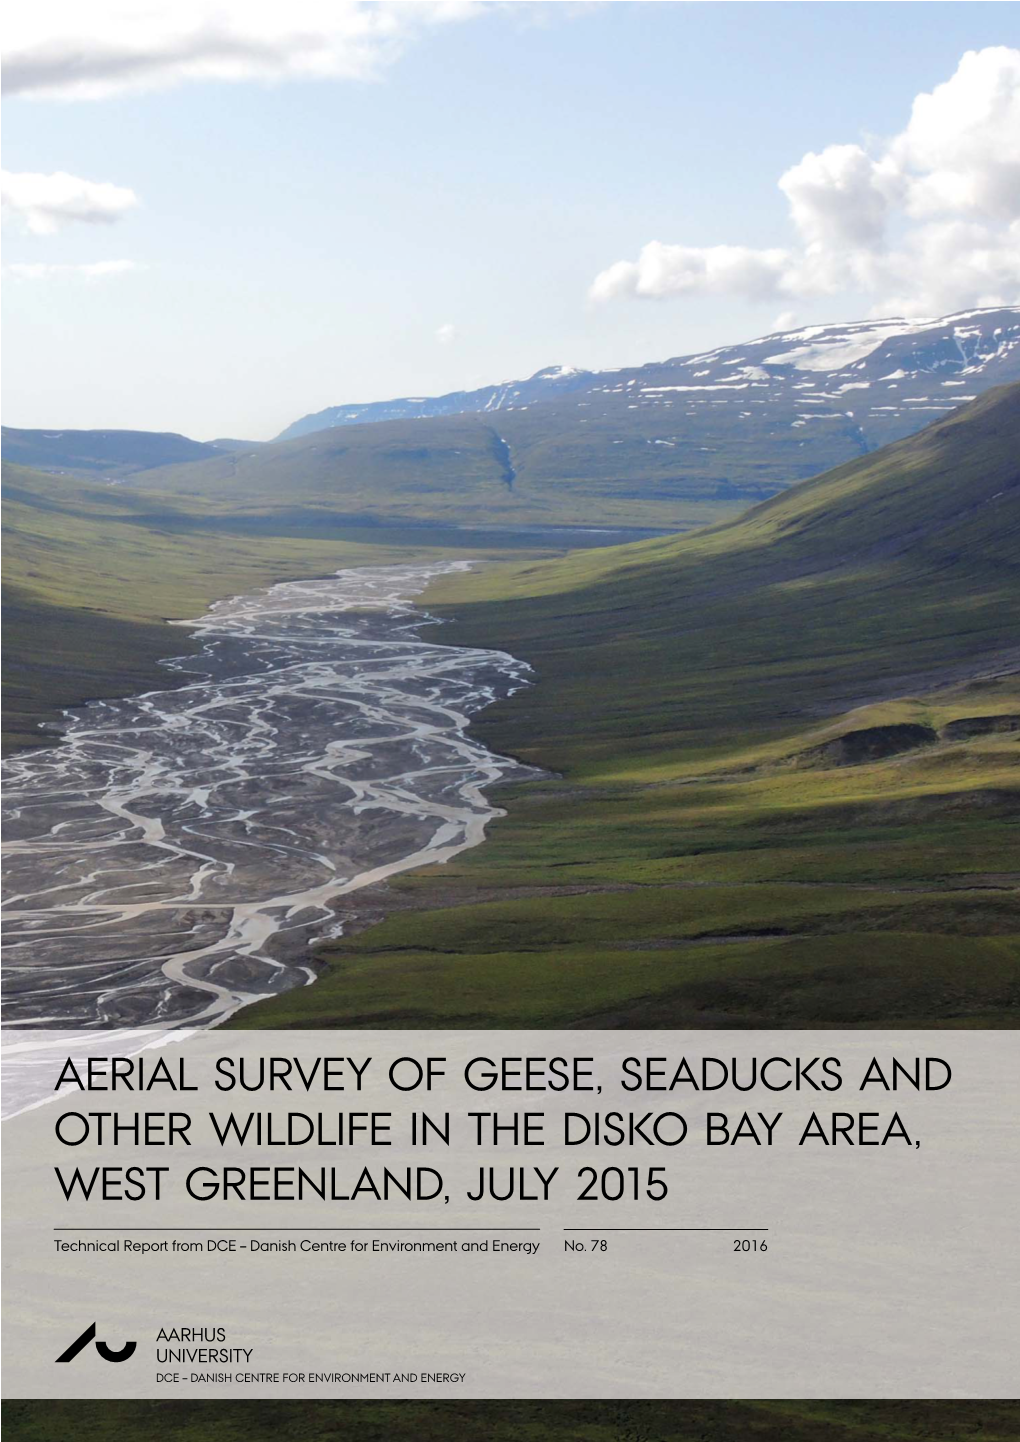 Aerial Survey of Geese, Seaducks and Other Wildlife in the Disko Bay Area, West Greenland, July 2015